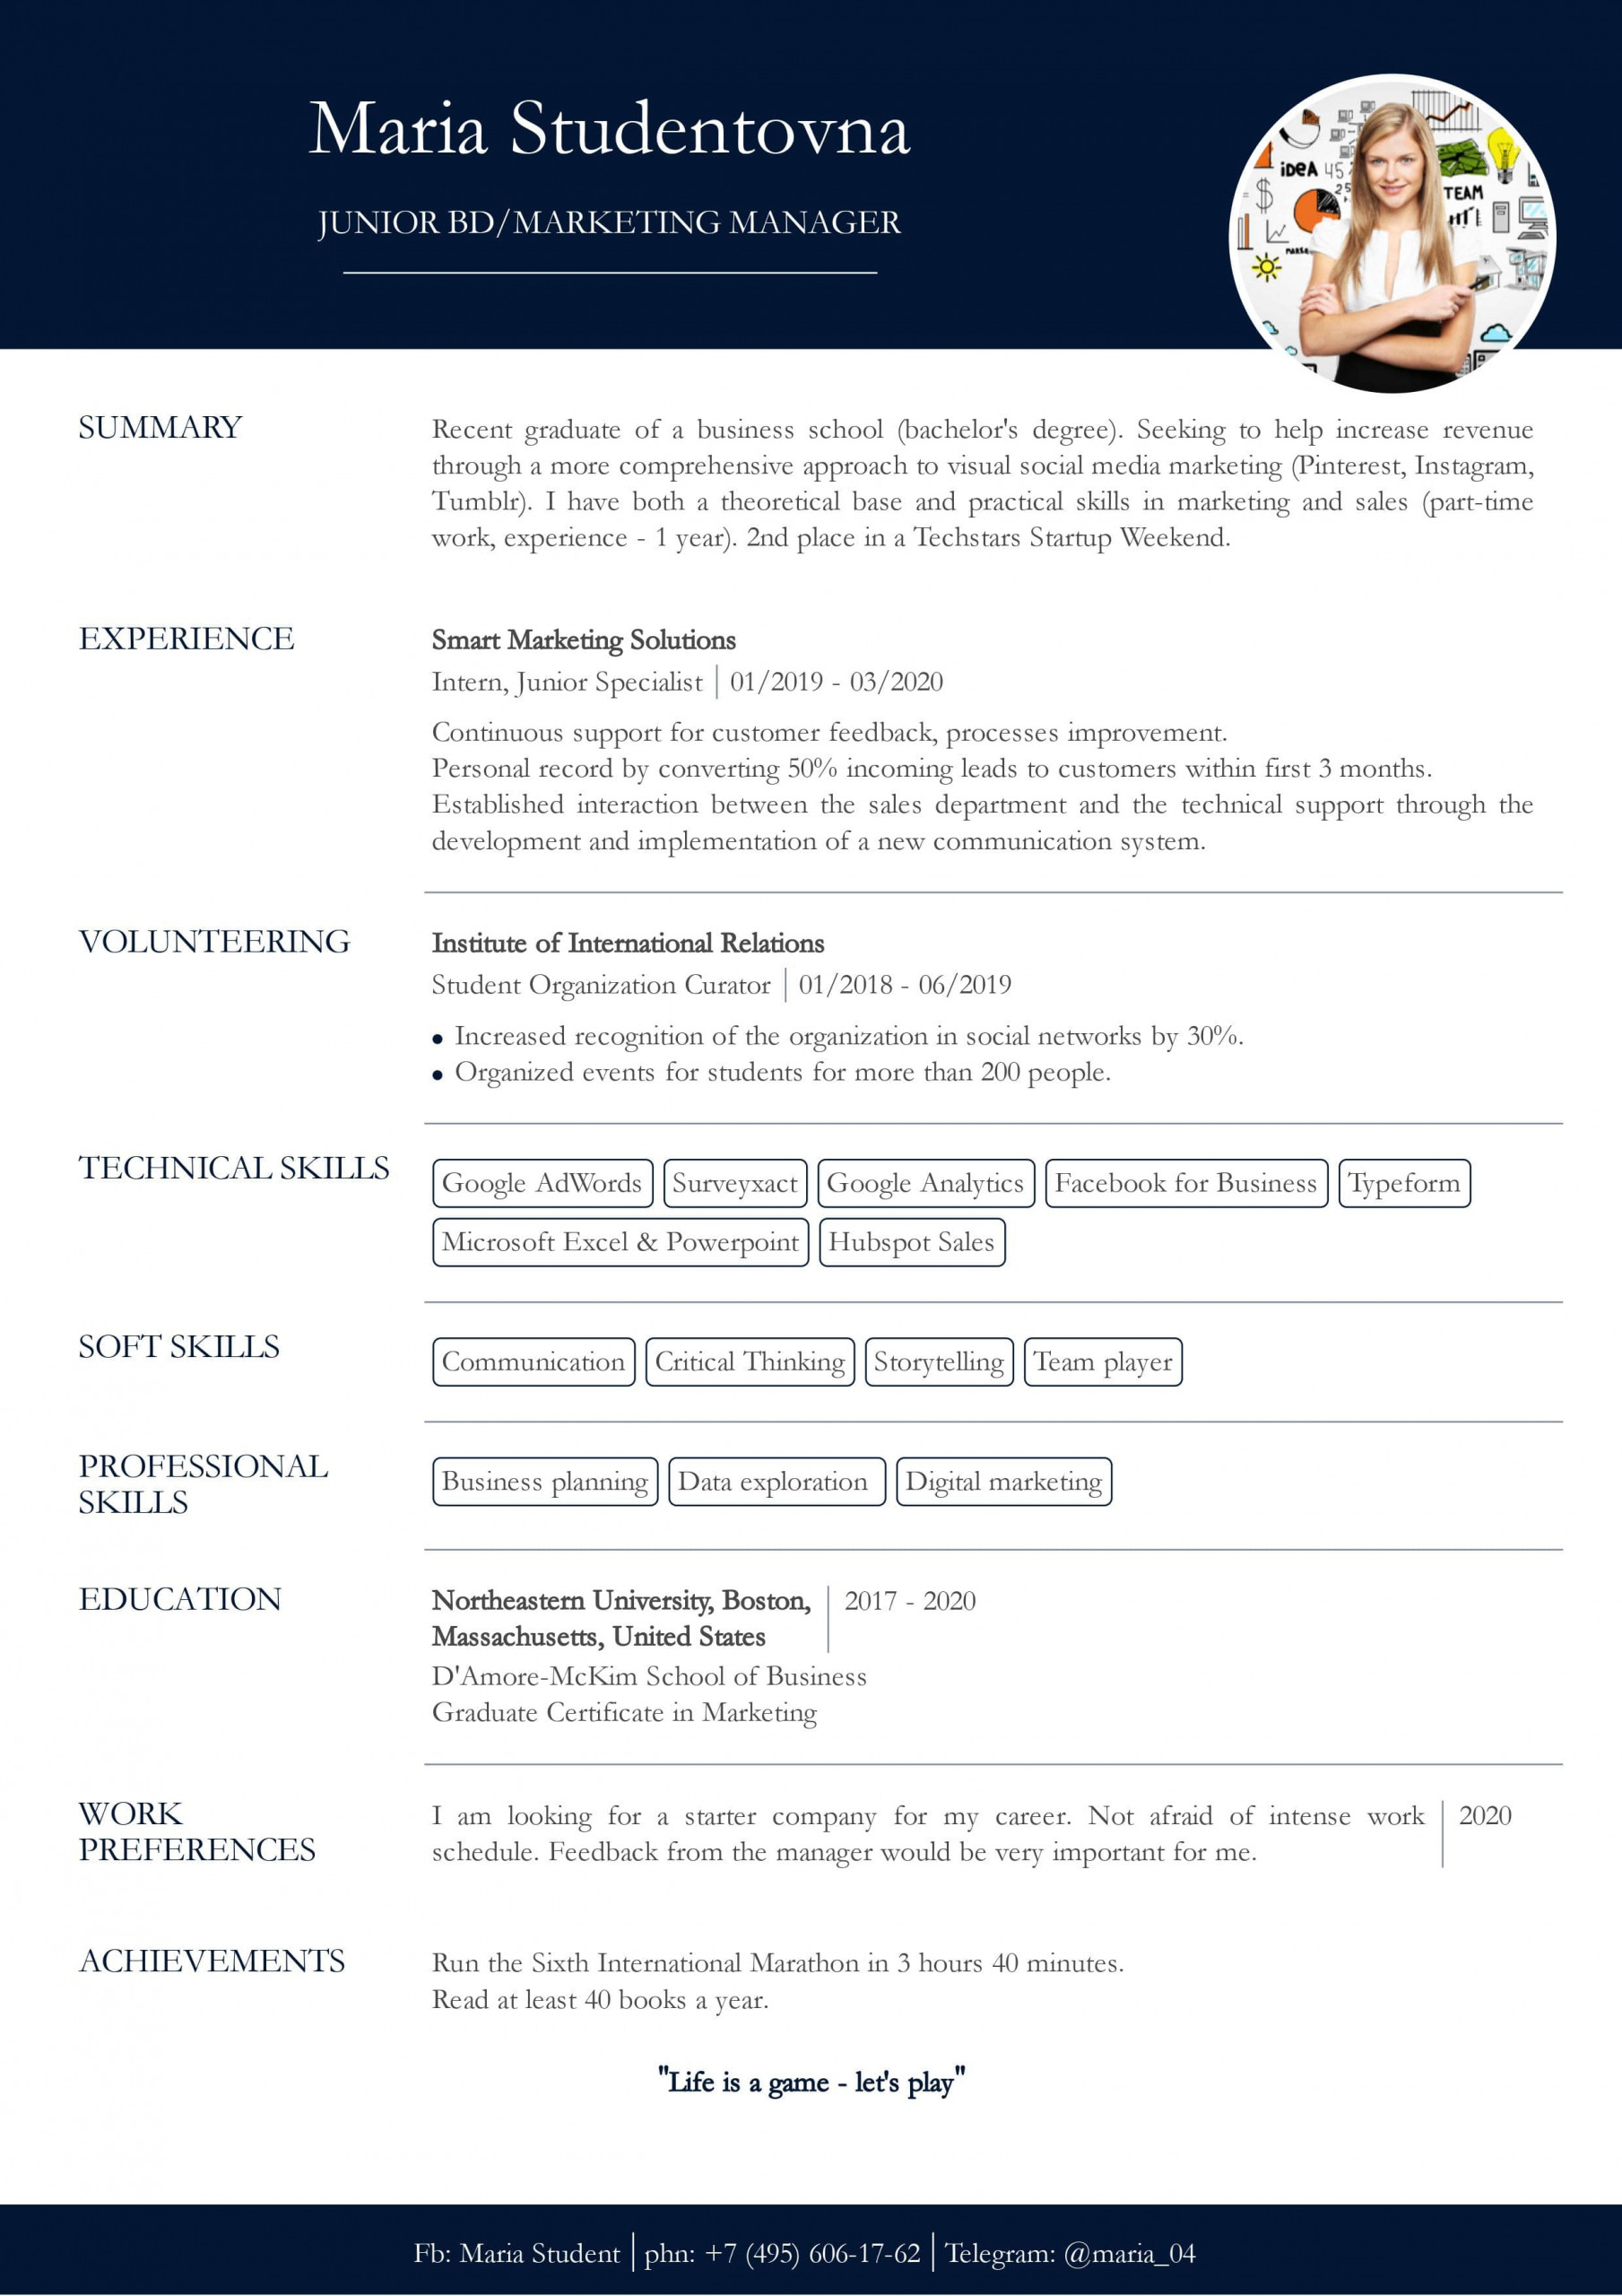 Sample Resume for College Graduate with Little Experience Resume with No Work Experience. Sample for Students. – Cv2you Blog